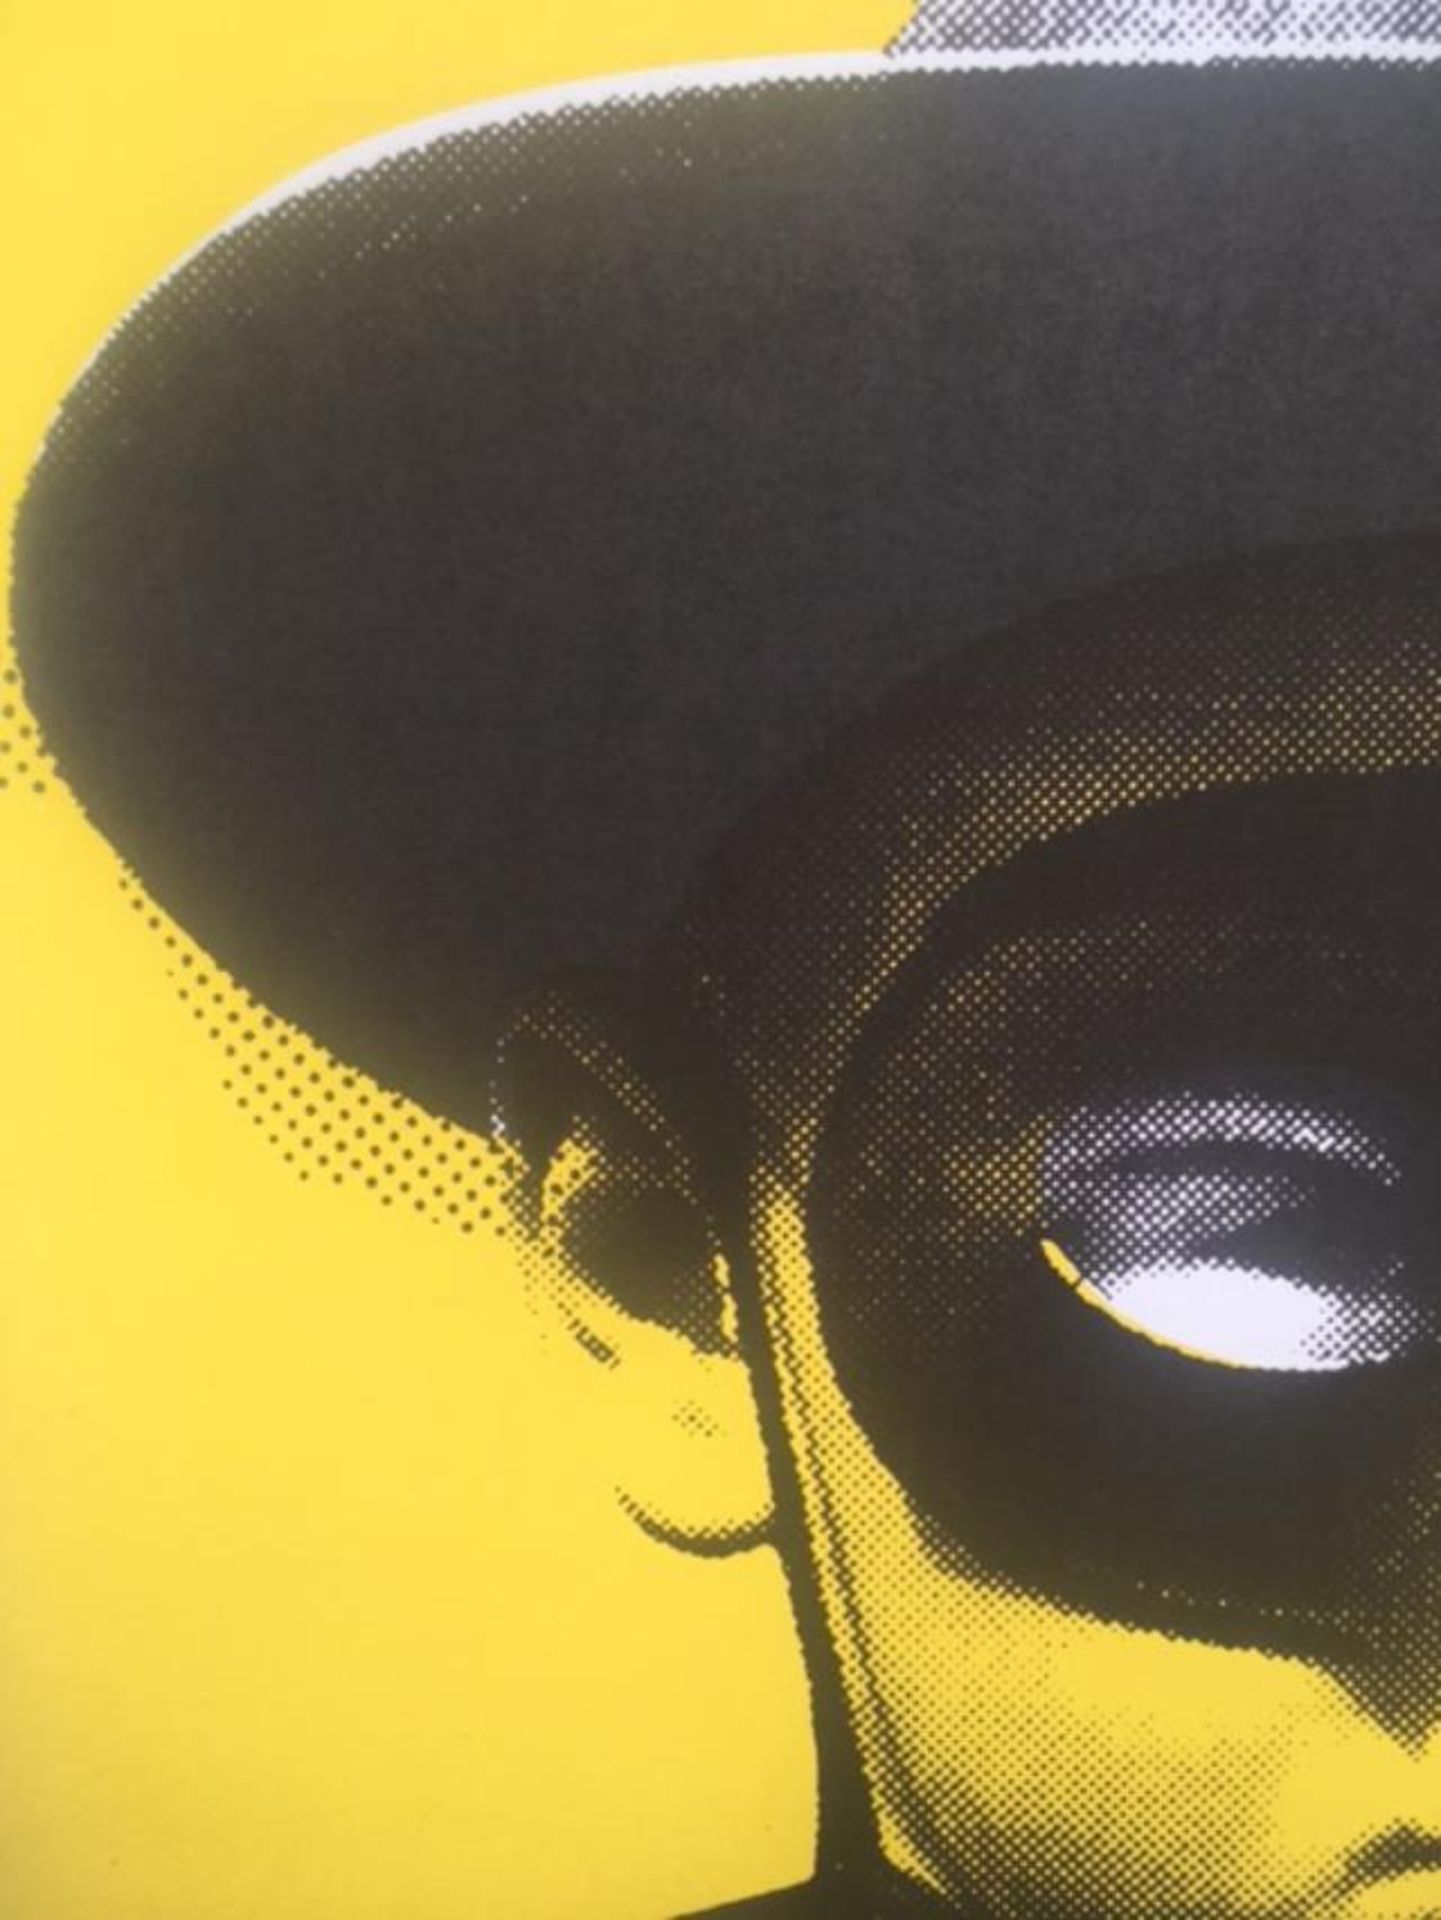 Paul Insect (B 1971) Big Head, Signed Limited Edition Screen Print, Published By Pictures On Wall... - Image 3 of 9